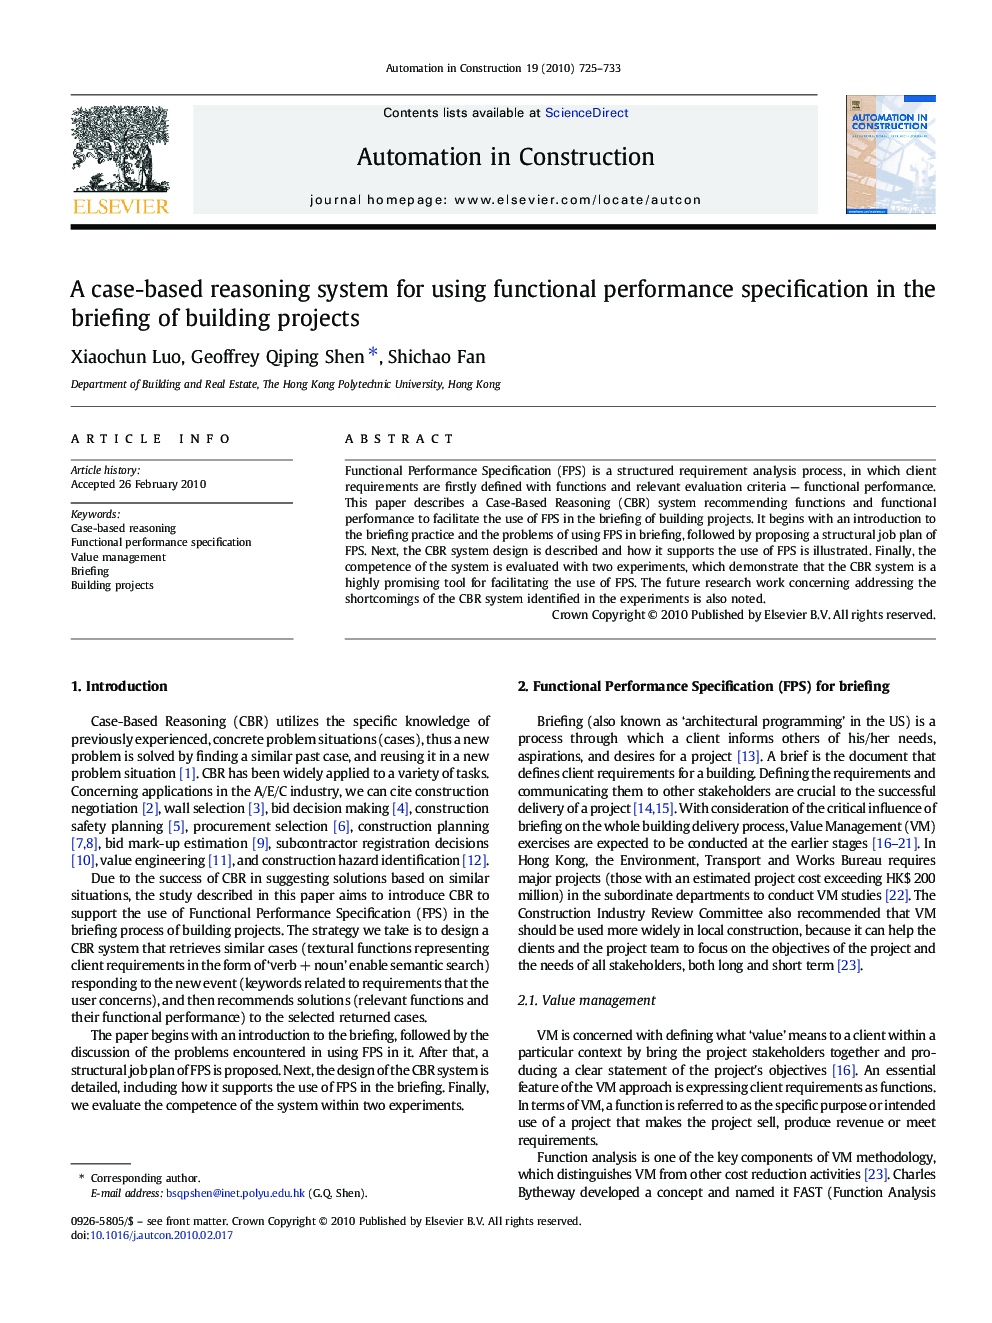 A case-based reasoning system for using functional performance specification in the briefing of building projects